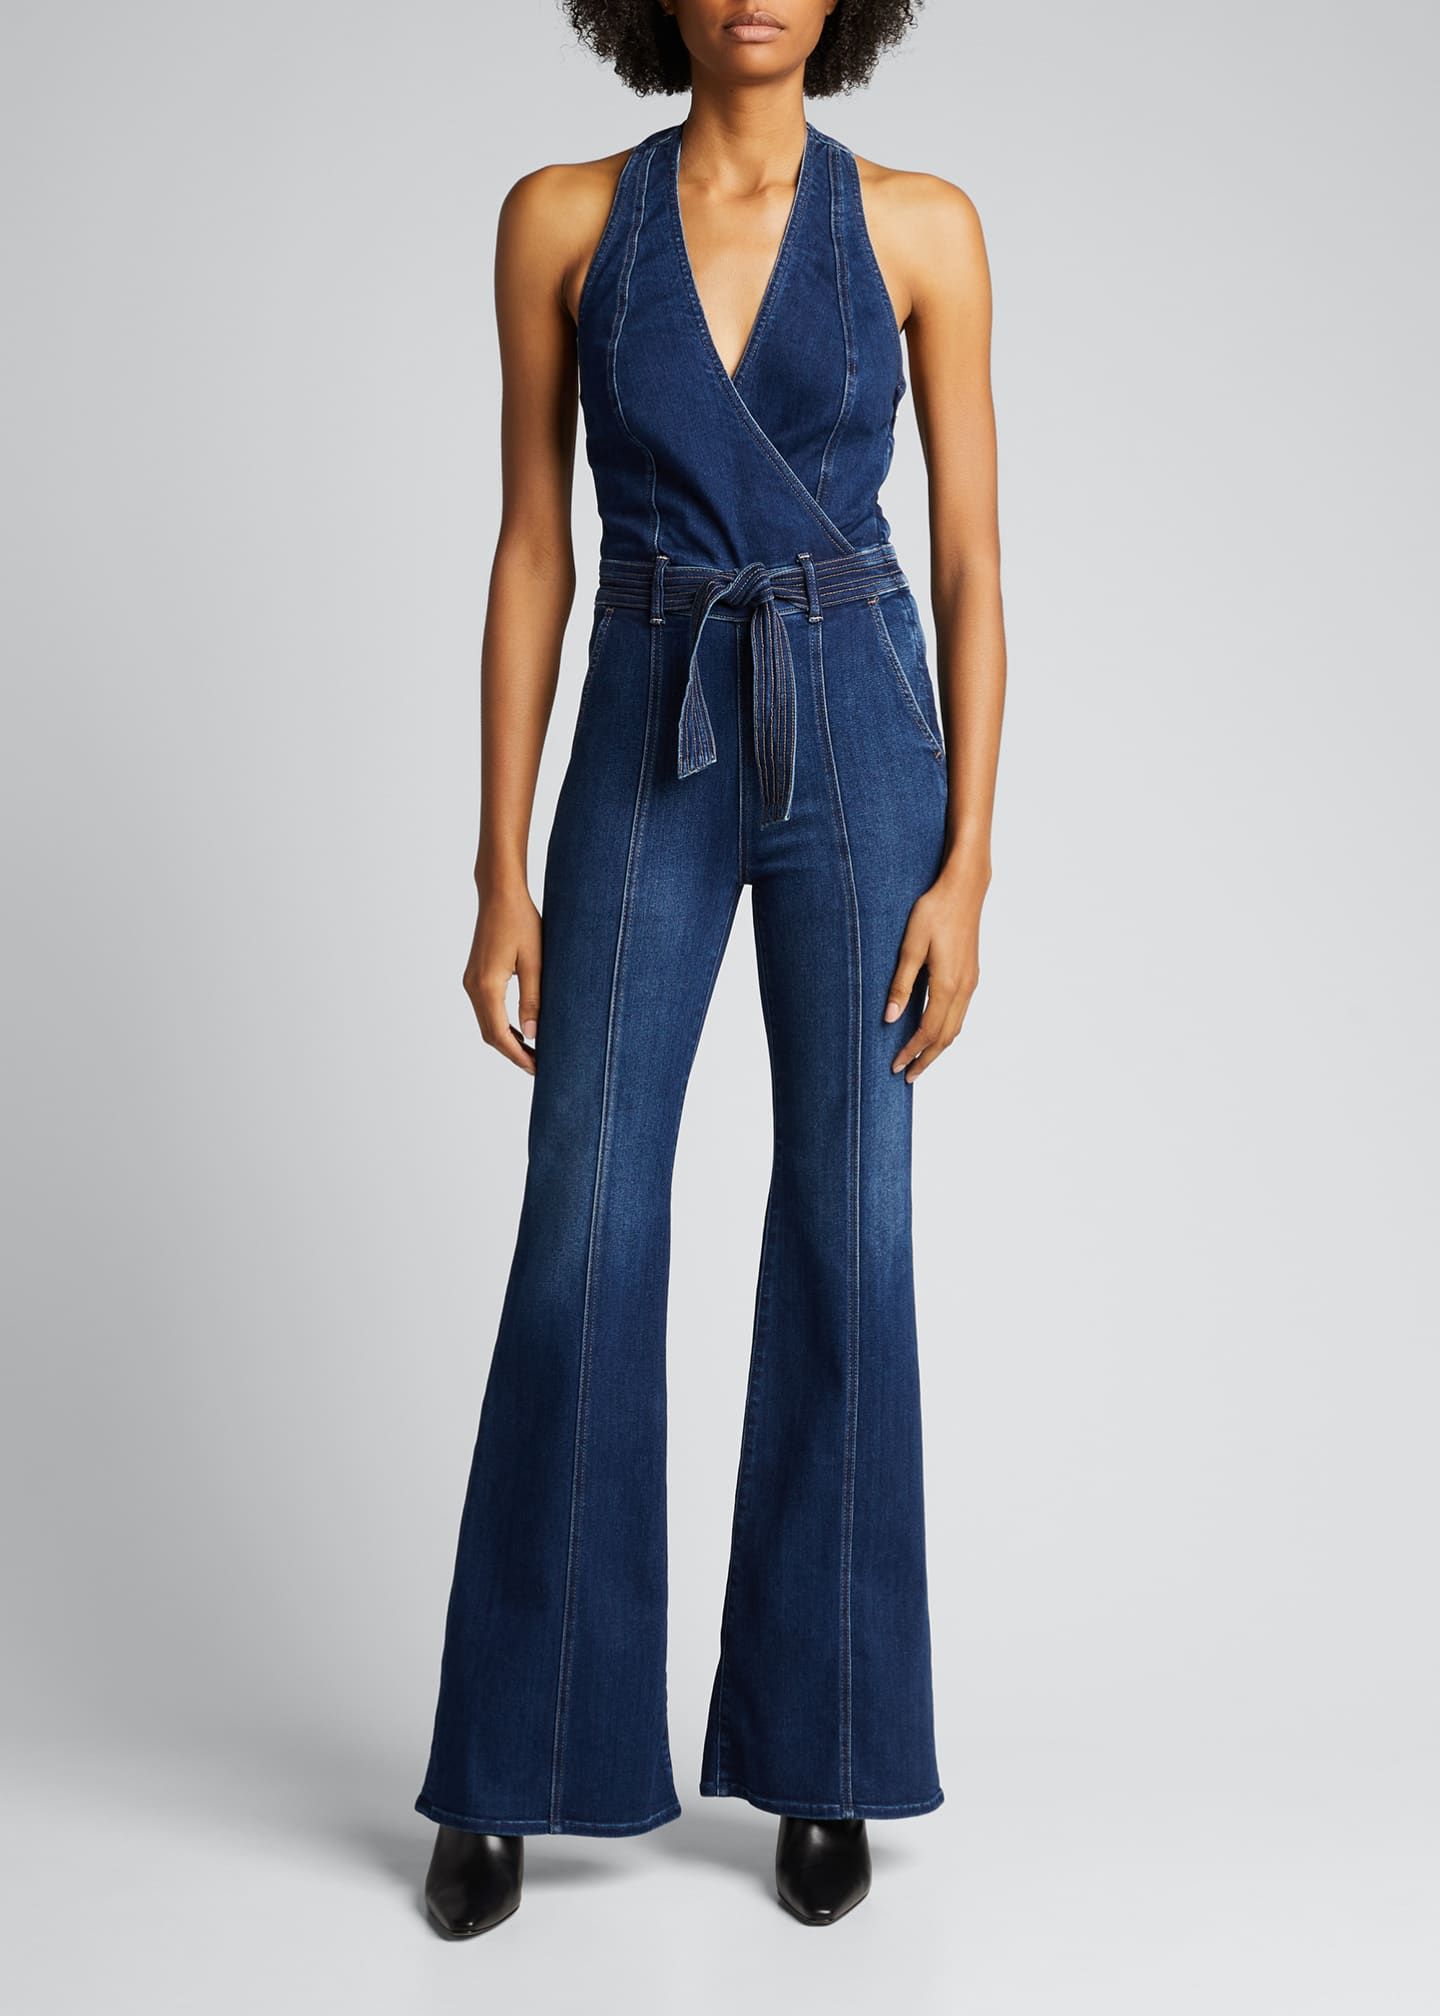 38 Best Jumpsuits for Tall Women 2020 | The Strategist